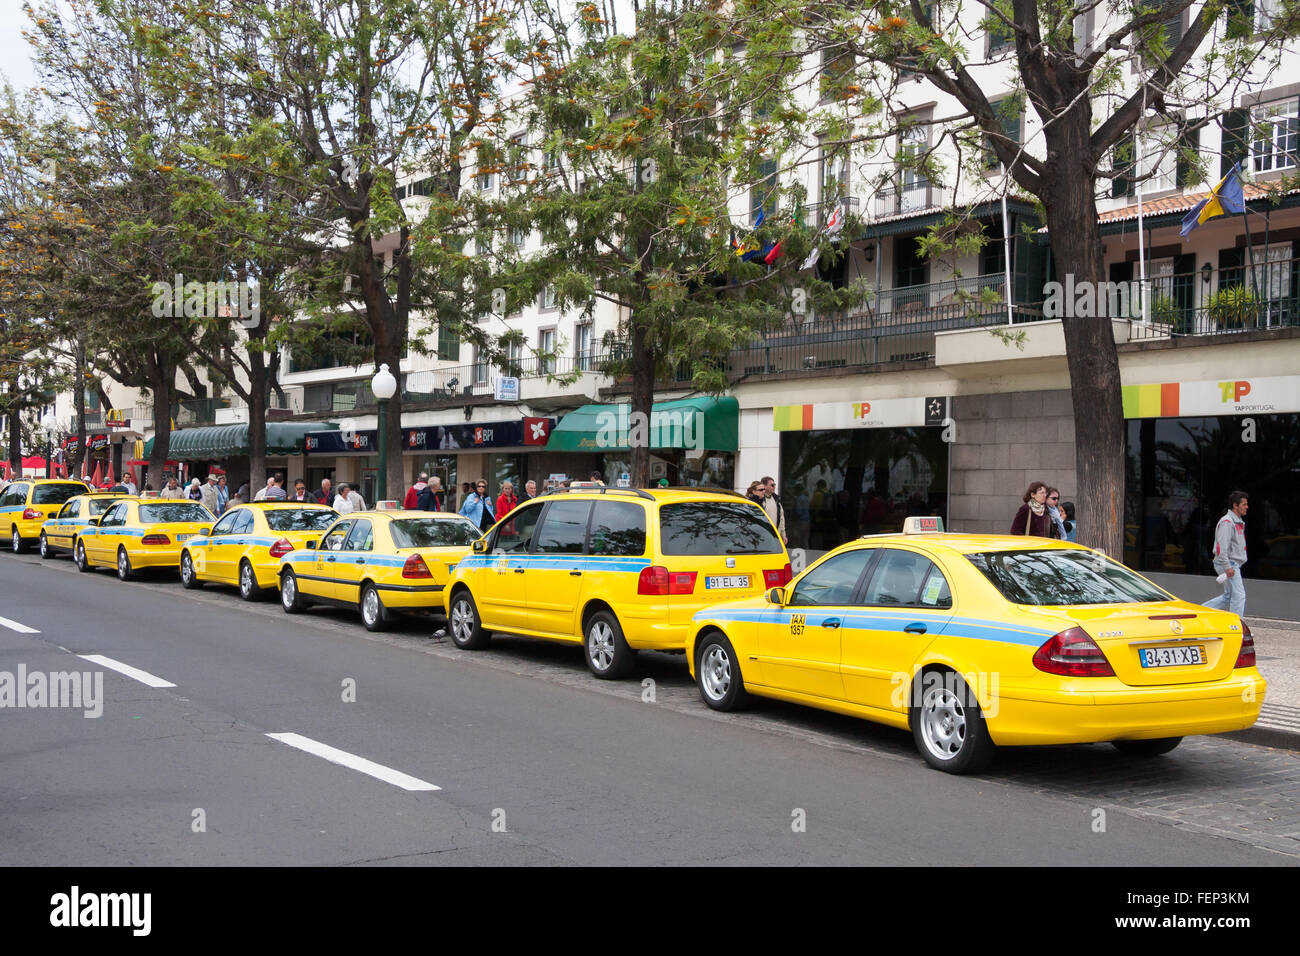 Taxi rank in Funchal Madeira Stock Photo